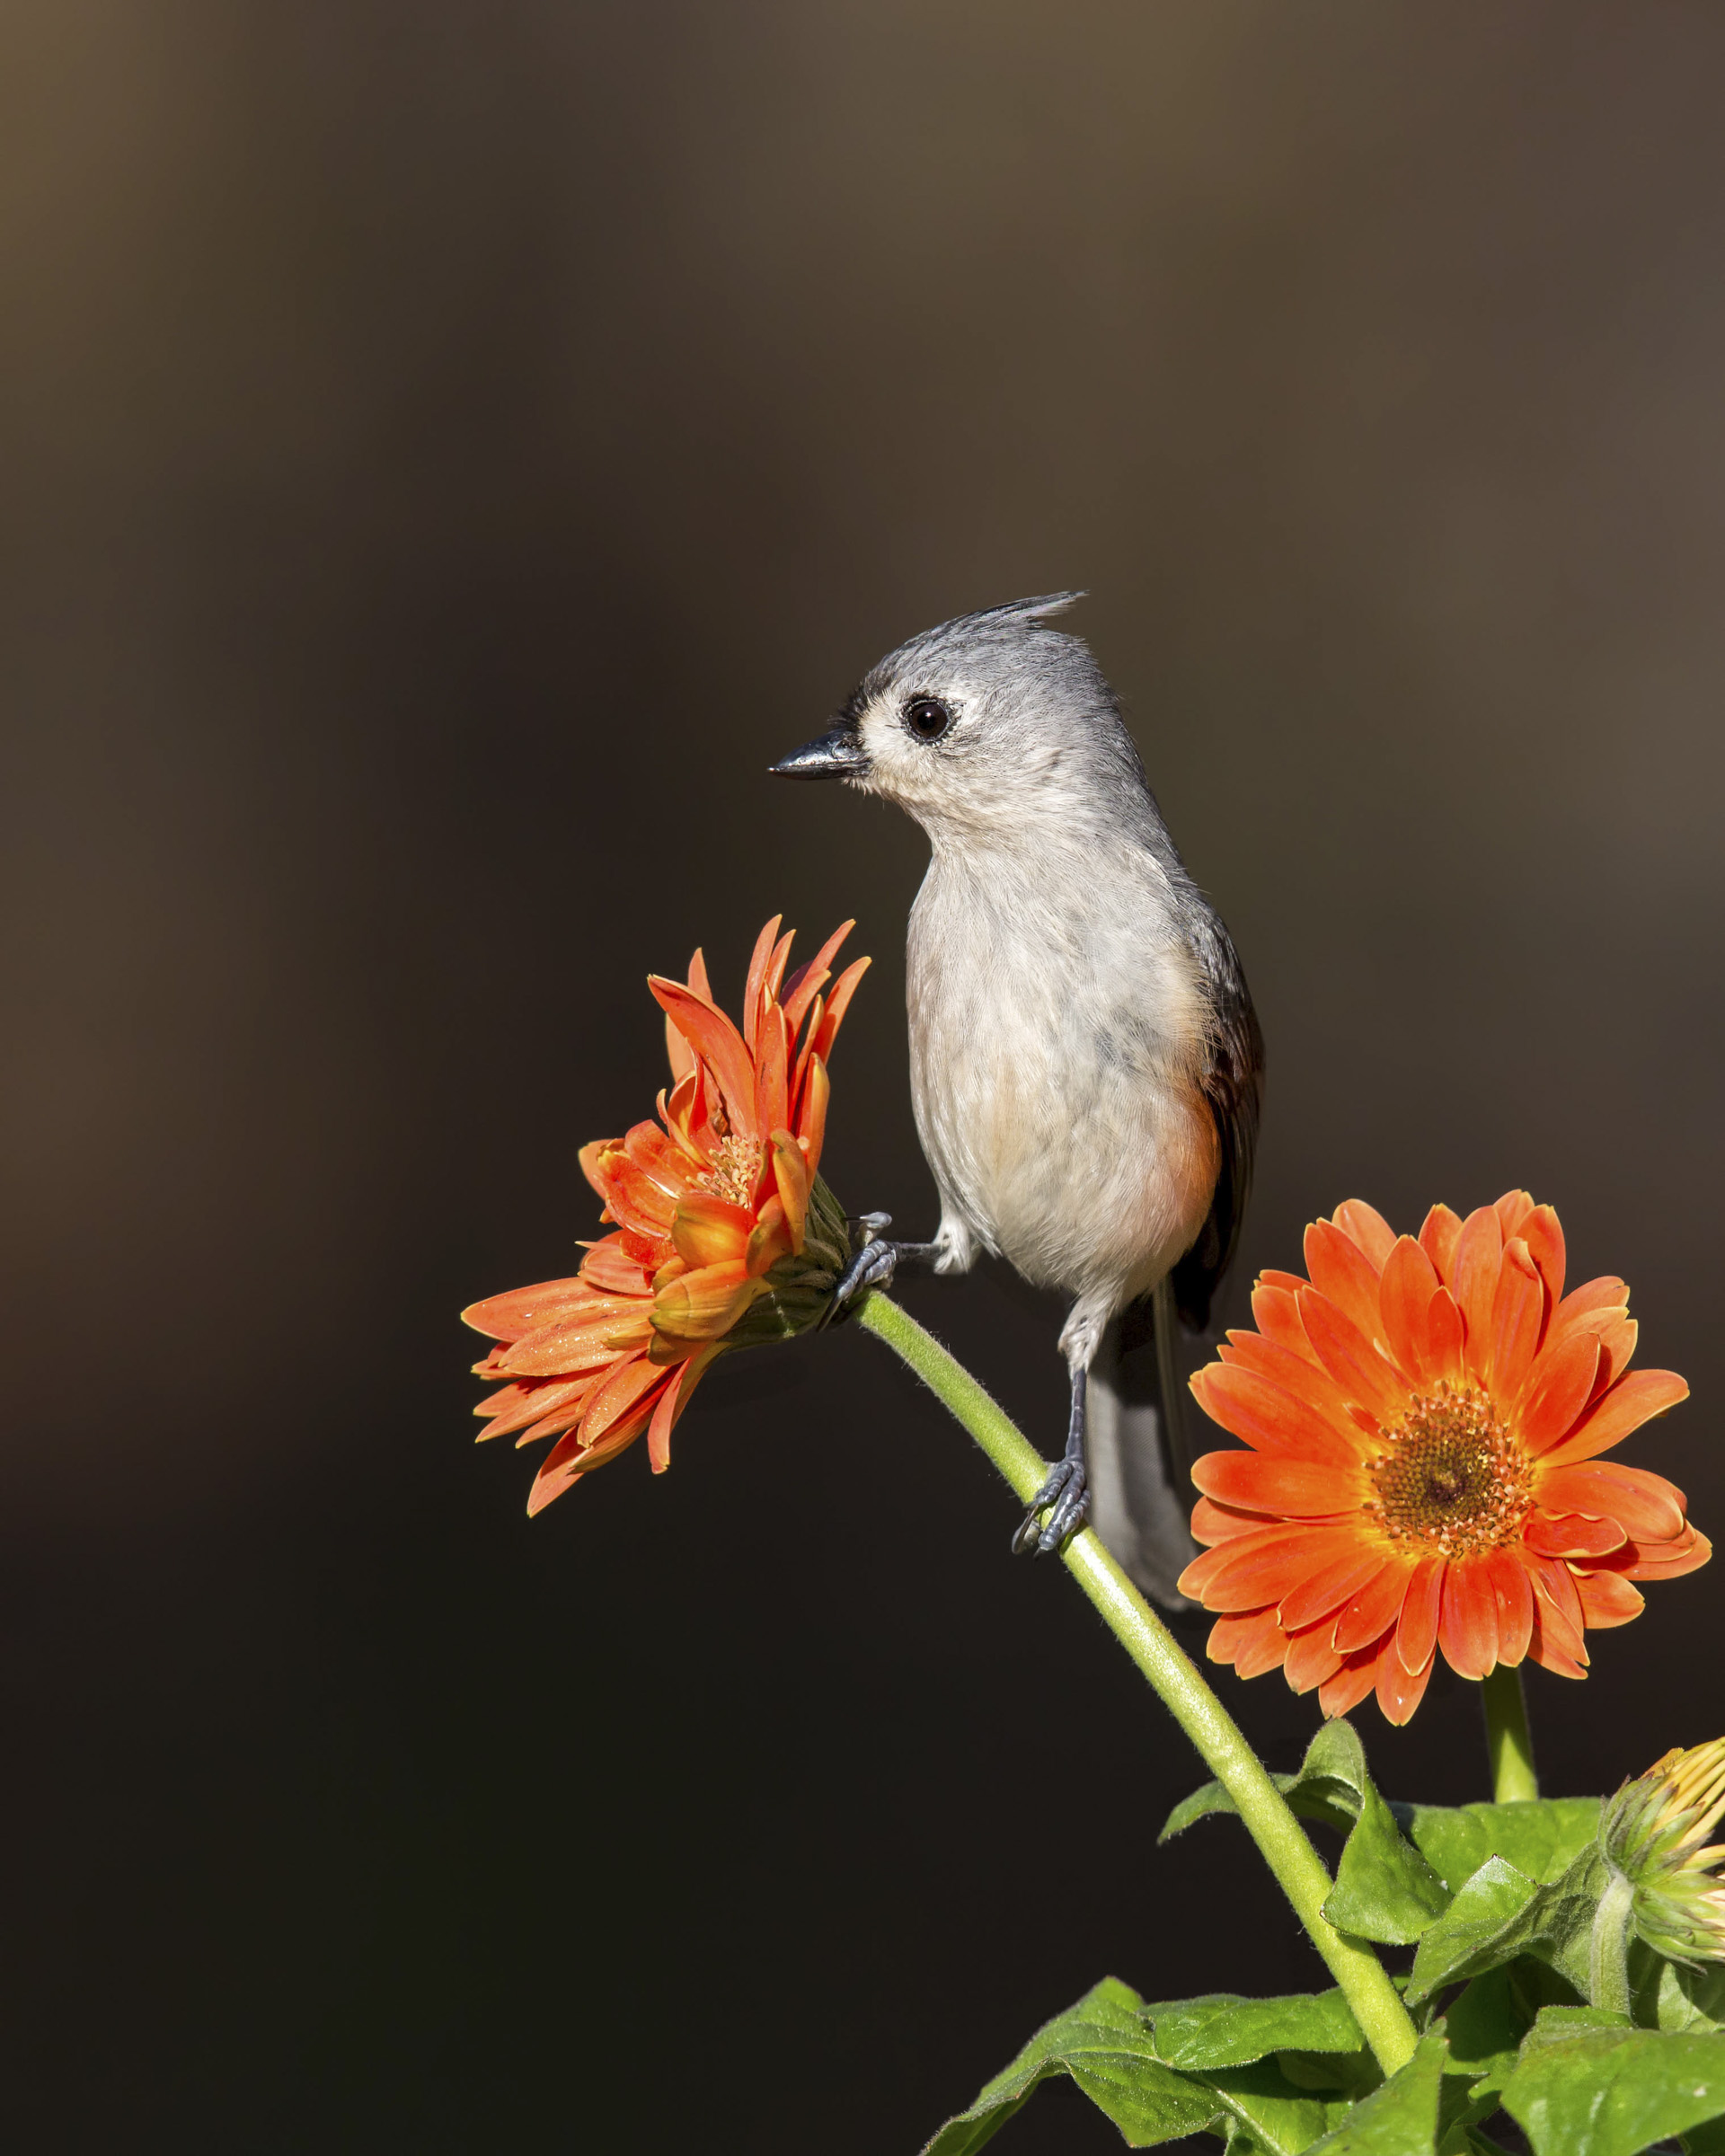 Tufted Titmouse sitting on the stem of an orange flower, with another orange flower in the background. Photo: Judy Lyle.